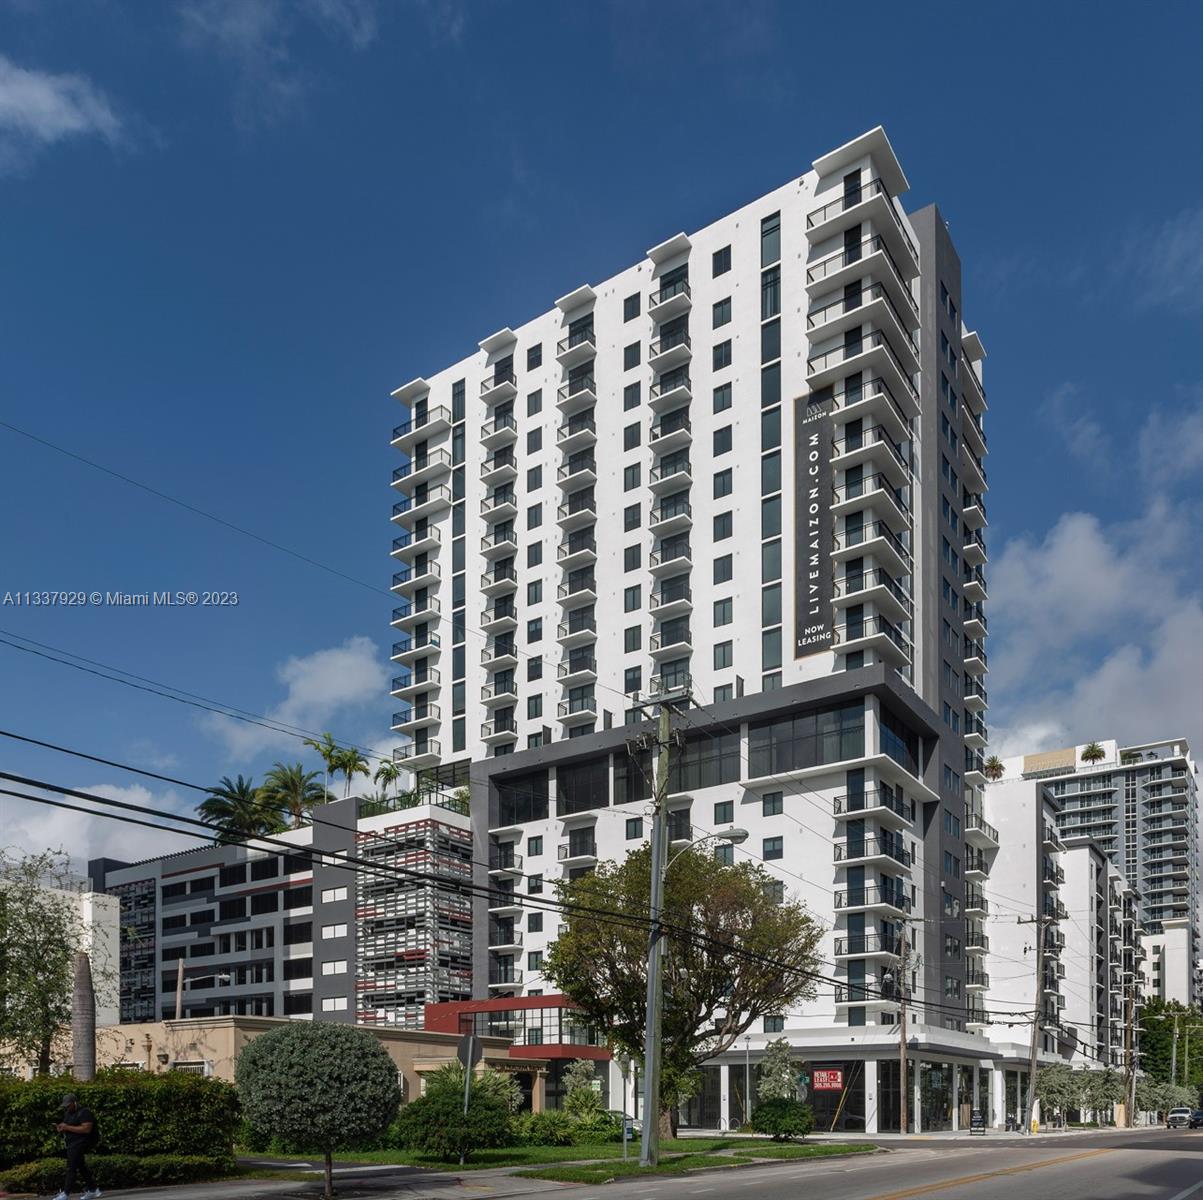 Our Downtown Miami apartments are perfectly situated in the upscale Brickell neighborhood where everything you need for a luxury lifestyle is at your fingertips. With a walk score of 84, residents of Maizon Brickell can explore local restaurants, boutiques, and chic rooftop bars on foot. Maizon Brickell features an 8th floor dedicated to amazing community amenities, including a resident lounge, e-kitchen, pool and sundeck with stunning views of the cityscape and Biscayne Bay. We offer a variety of floor plans, including studio, one bedroom, and two-bedroom homes, and penthouse options are also available. Each of our luxury apartments feature European-style kitchens with quartz countertops, stainless steel appliances, private balconies, NEST thermostats, and electronic unit entries.